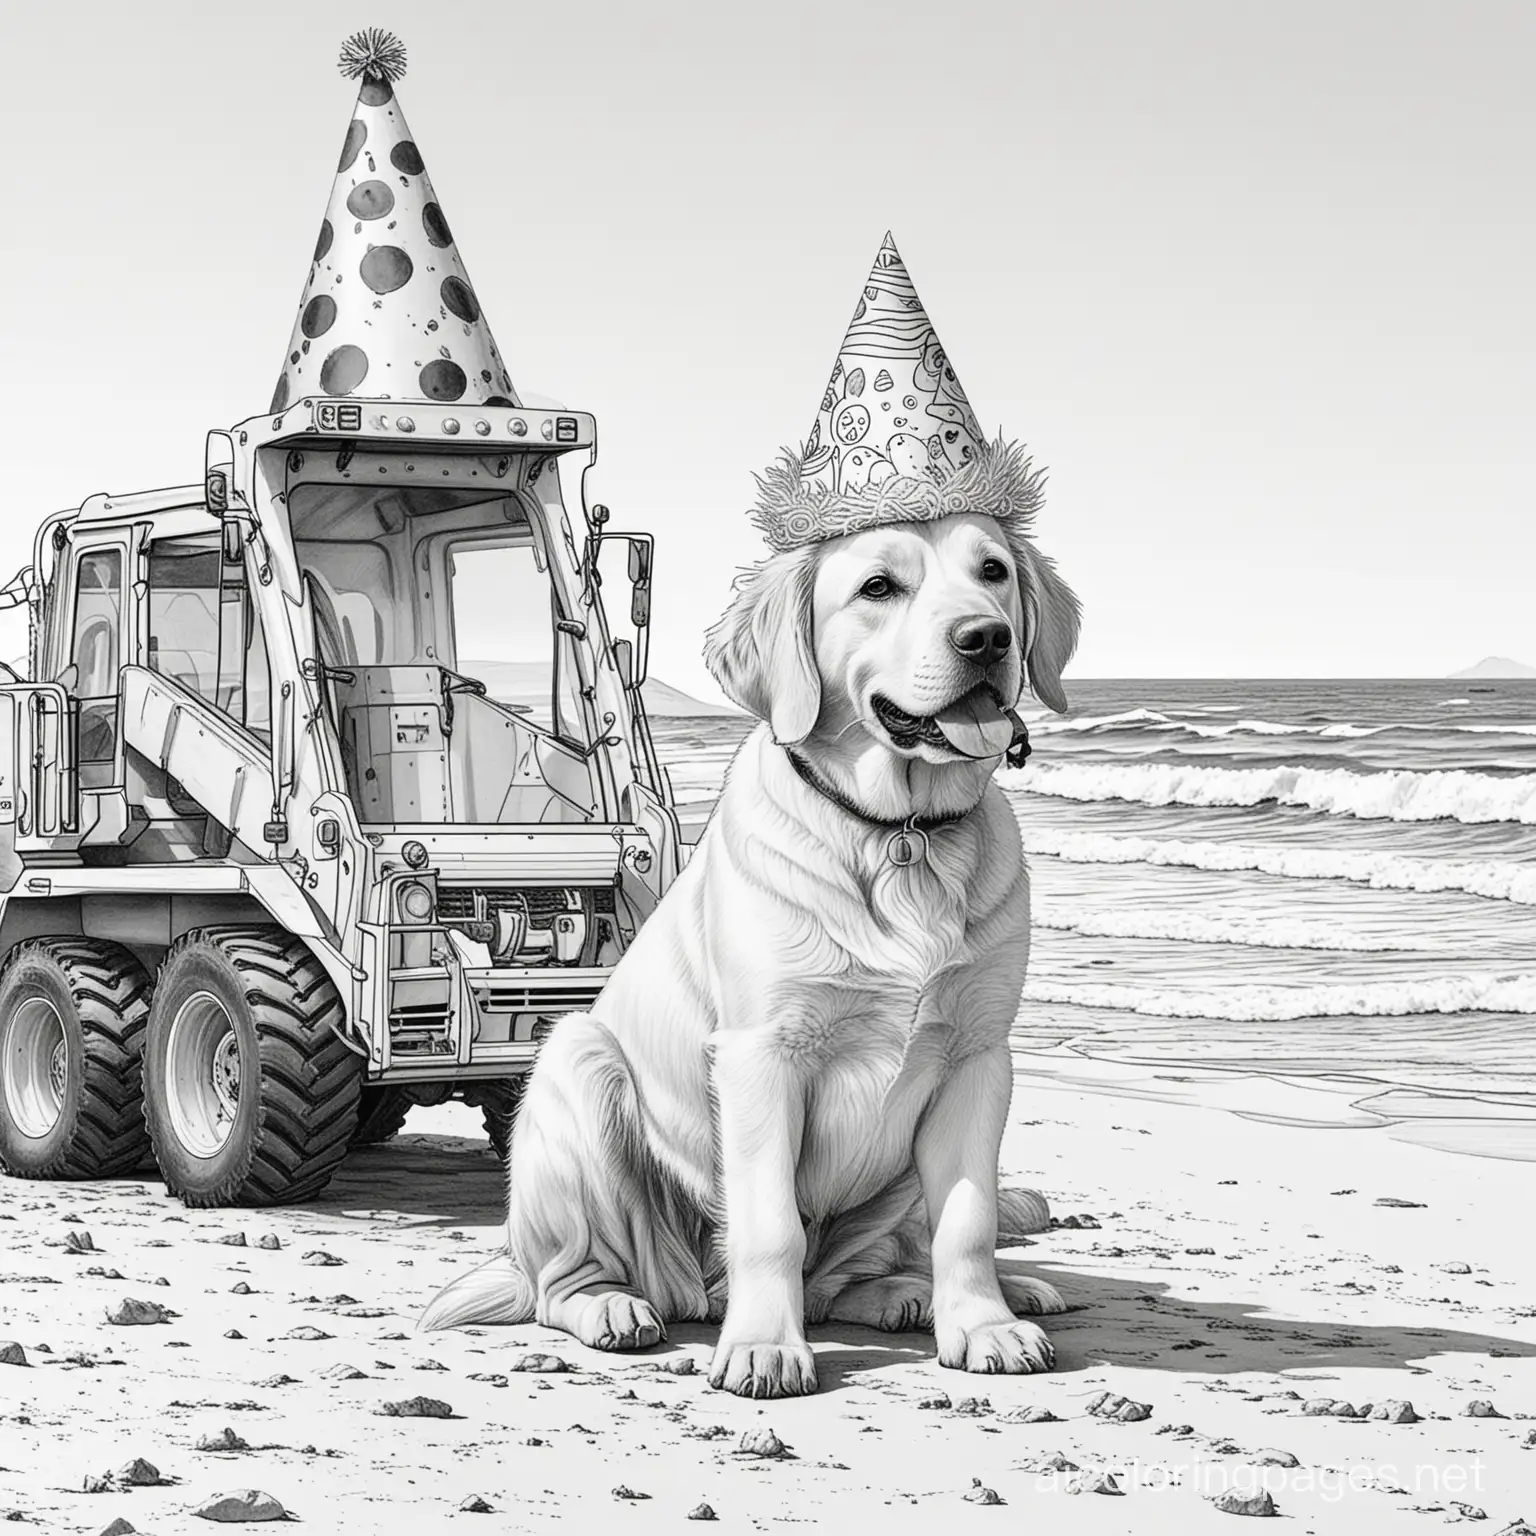 Dog wearing a party hat at the beach with a digger truck in the background, Coloring Page, black and white, line art, white background, Simplicity, Ample White Space. The background of the coloring page is plain white to make it easy for young children to color within the lines. The outlines of all the subjects are easy to distinguish, making it simple for kids to color without too much difficulty